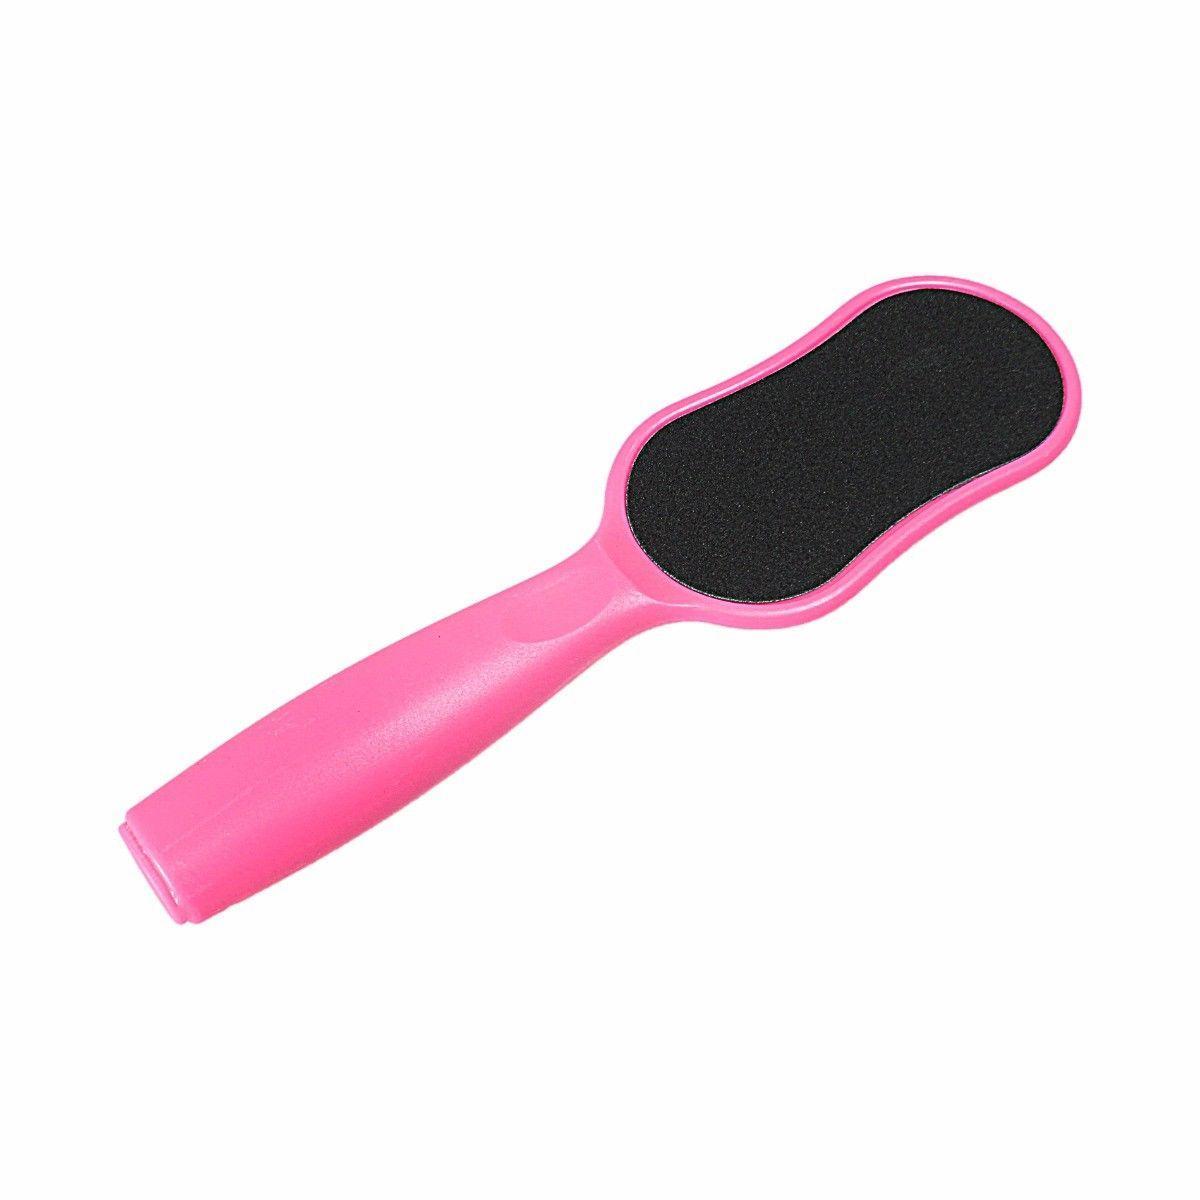 Plastic Rasp Foot Scrubber Cosmetology Tool In Assorted Colours 22cm 3264 (Large Letter Rate)